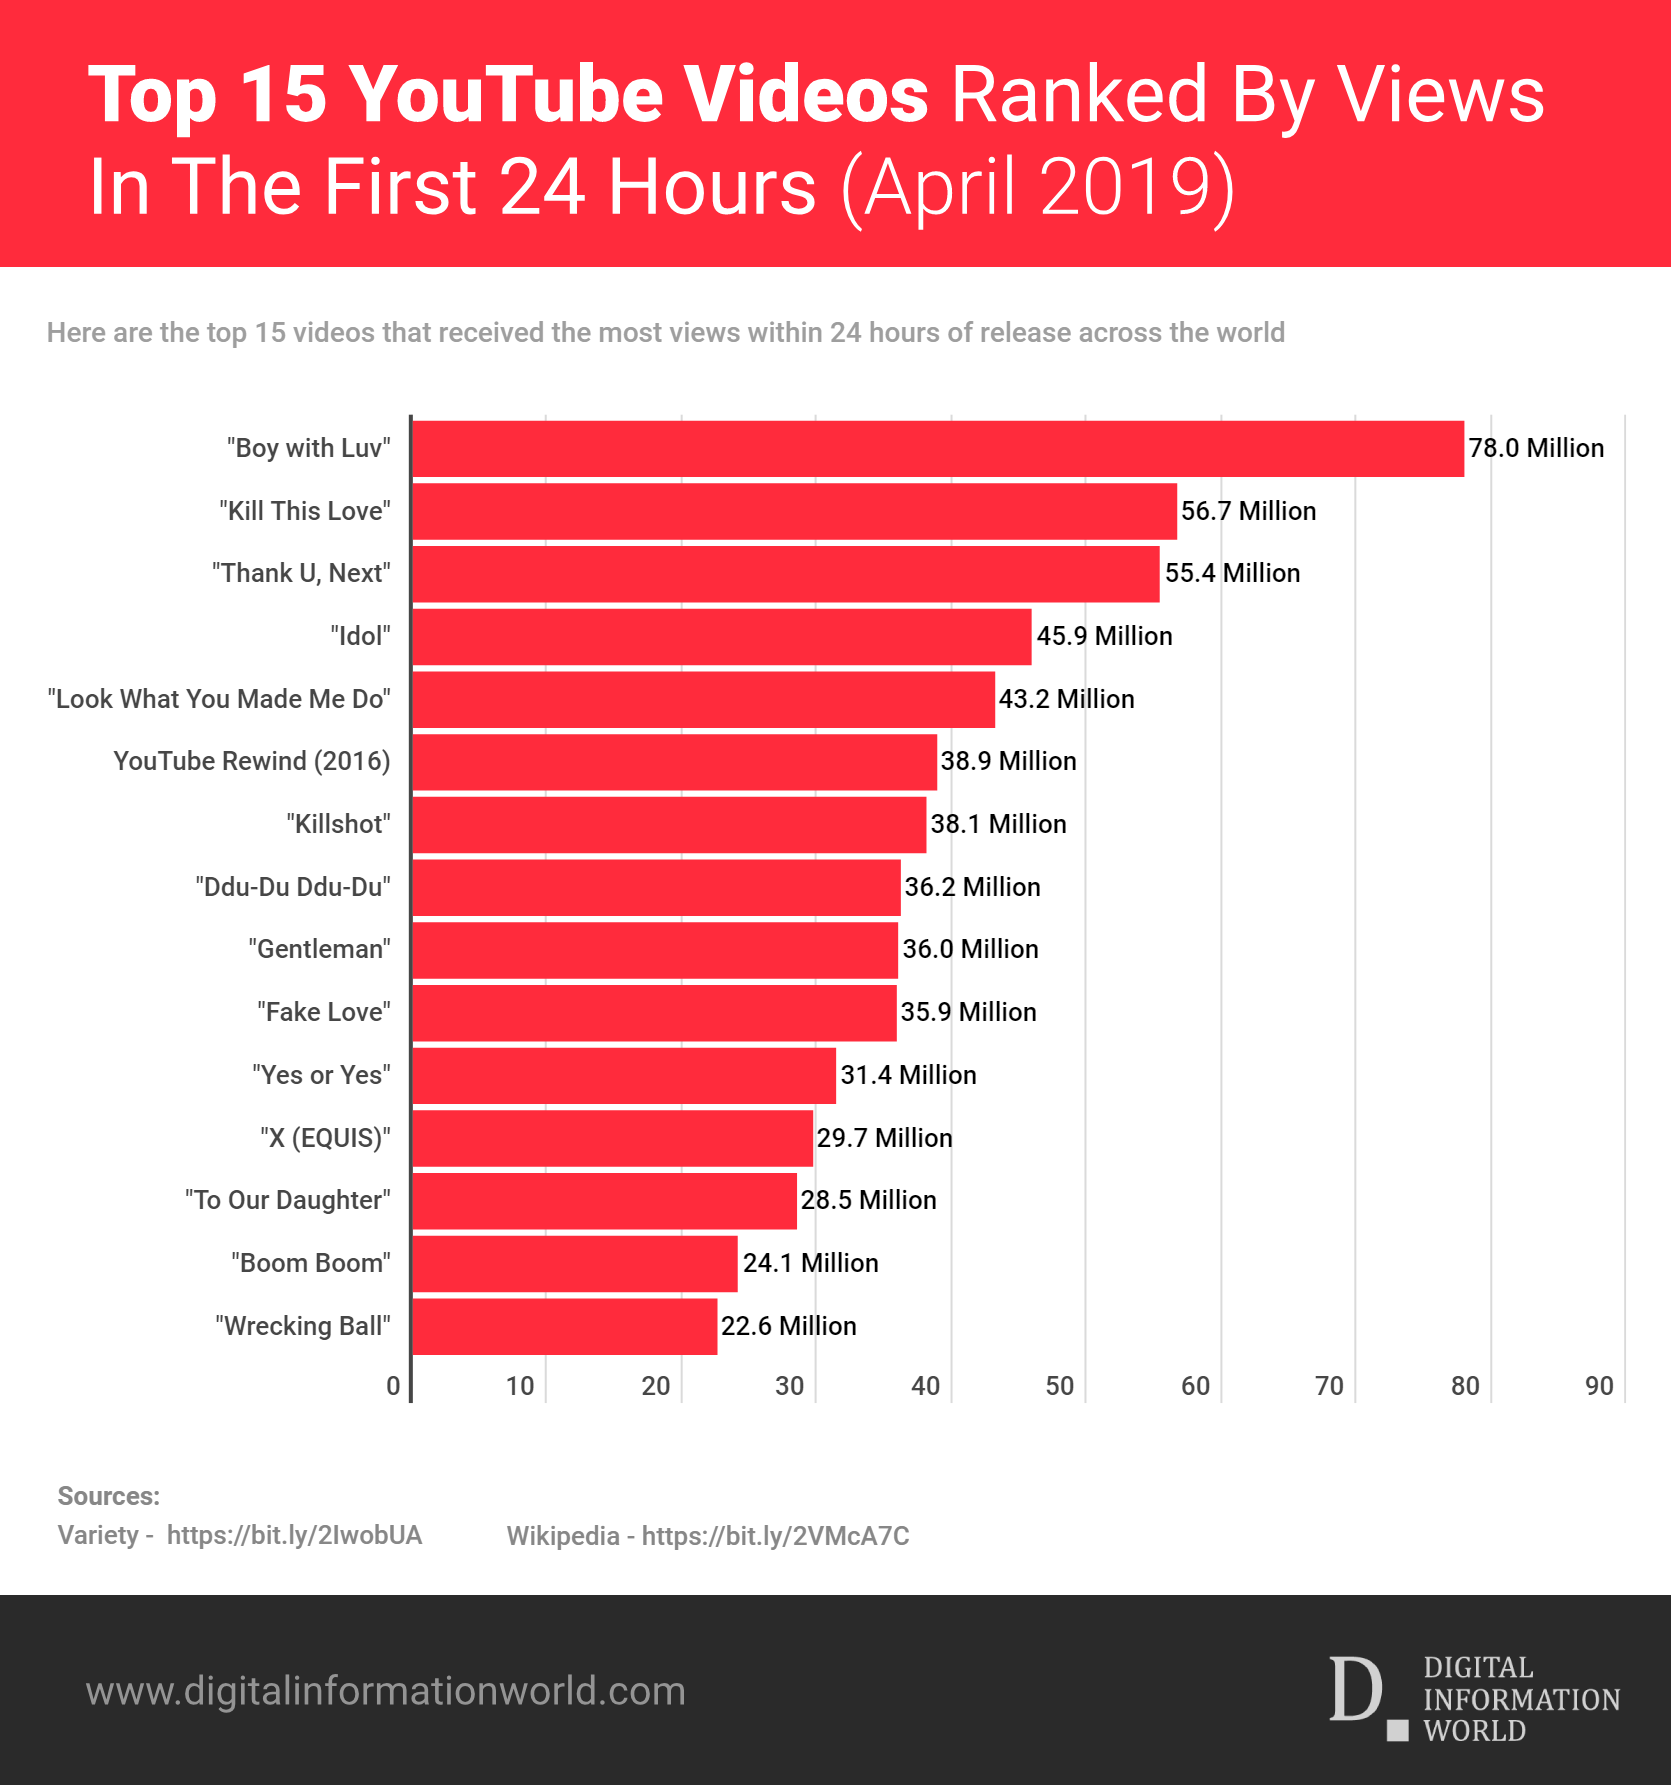 Top 15 YouTube videos ranked by views in the first 24 hours: